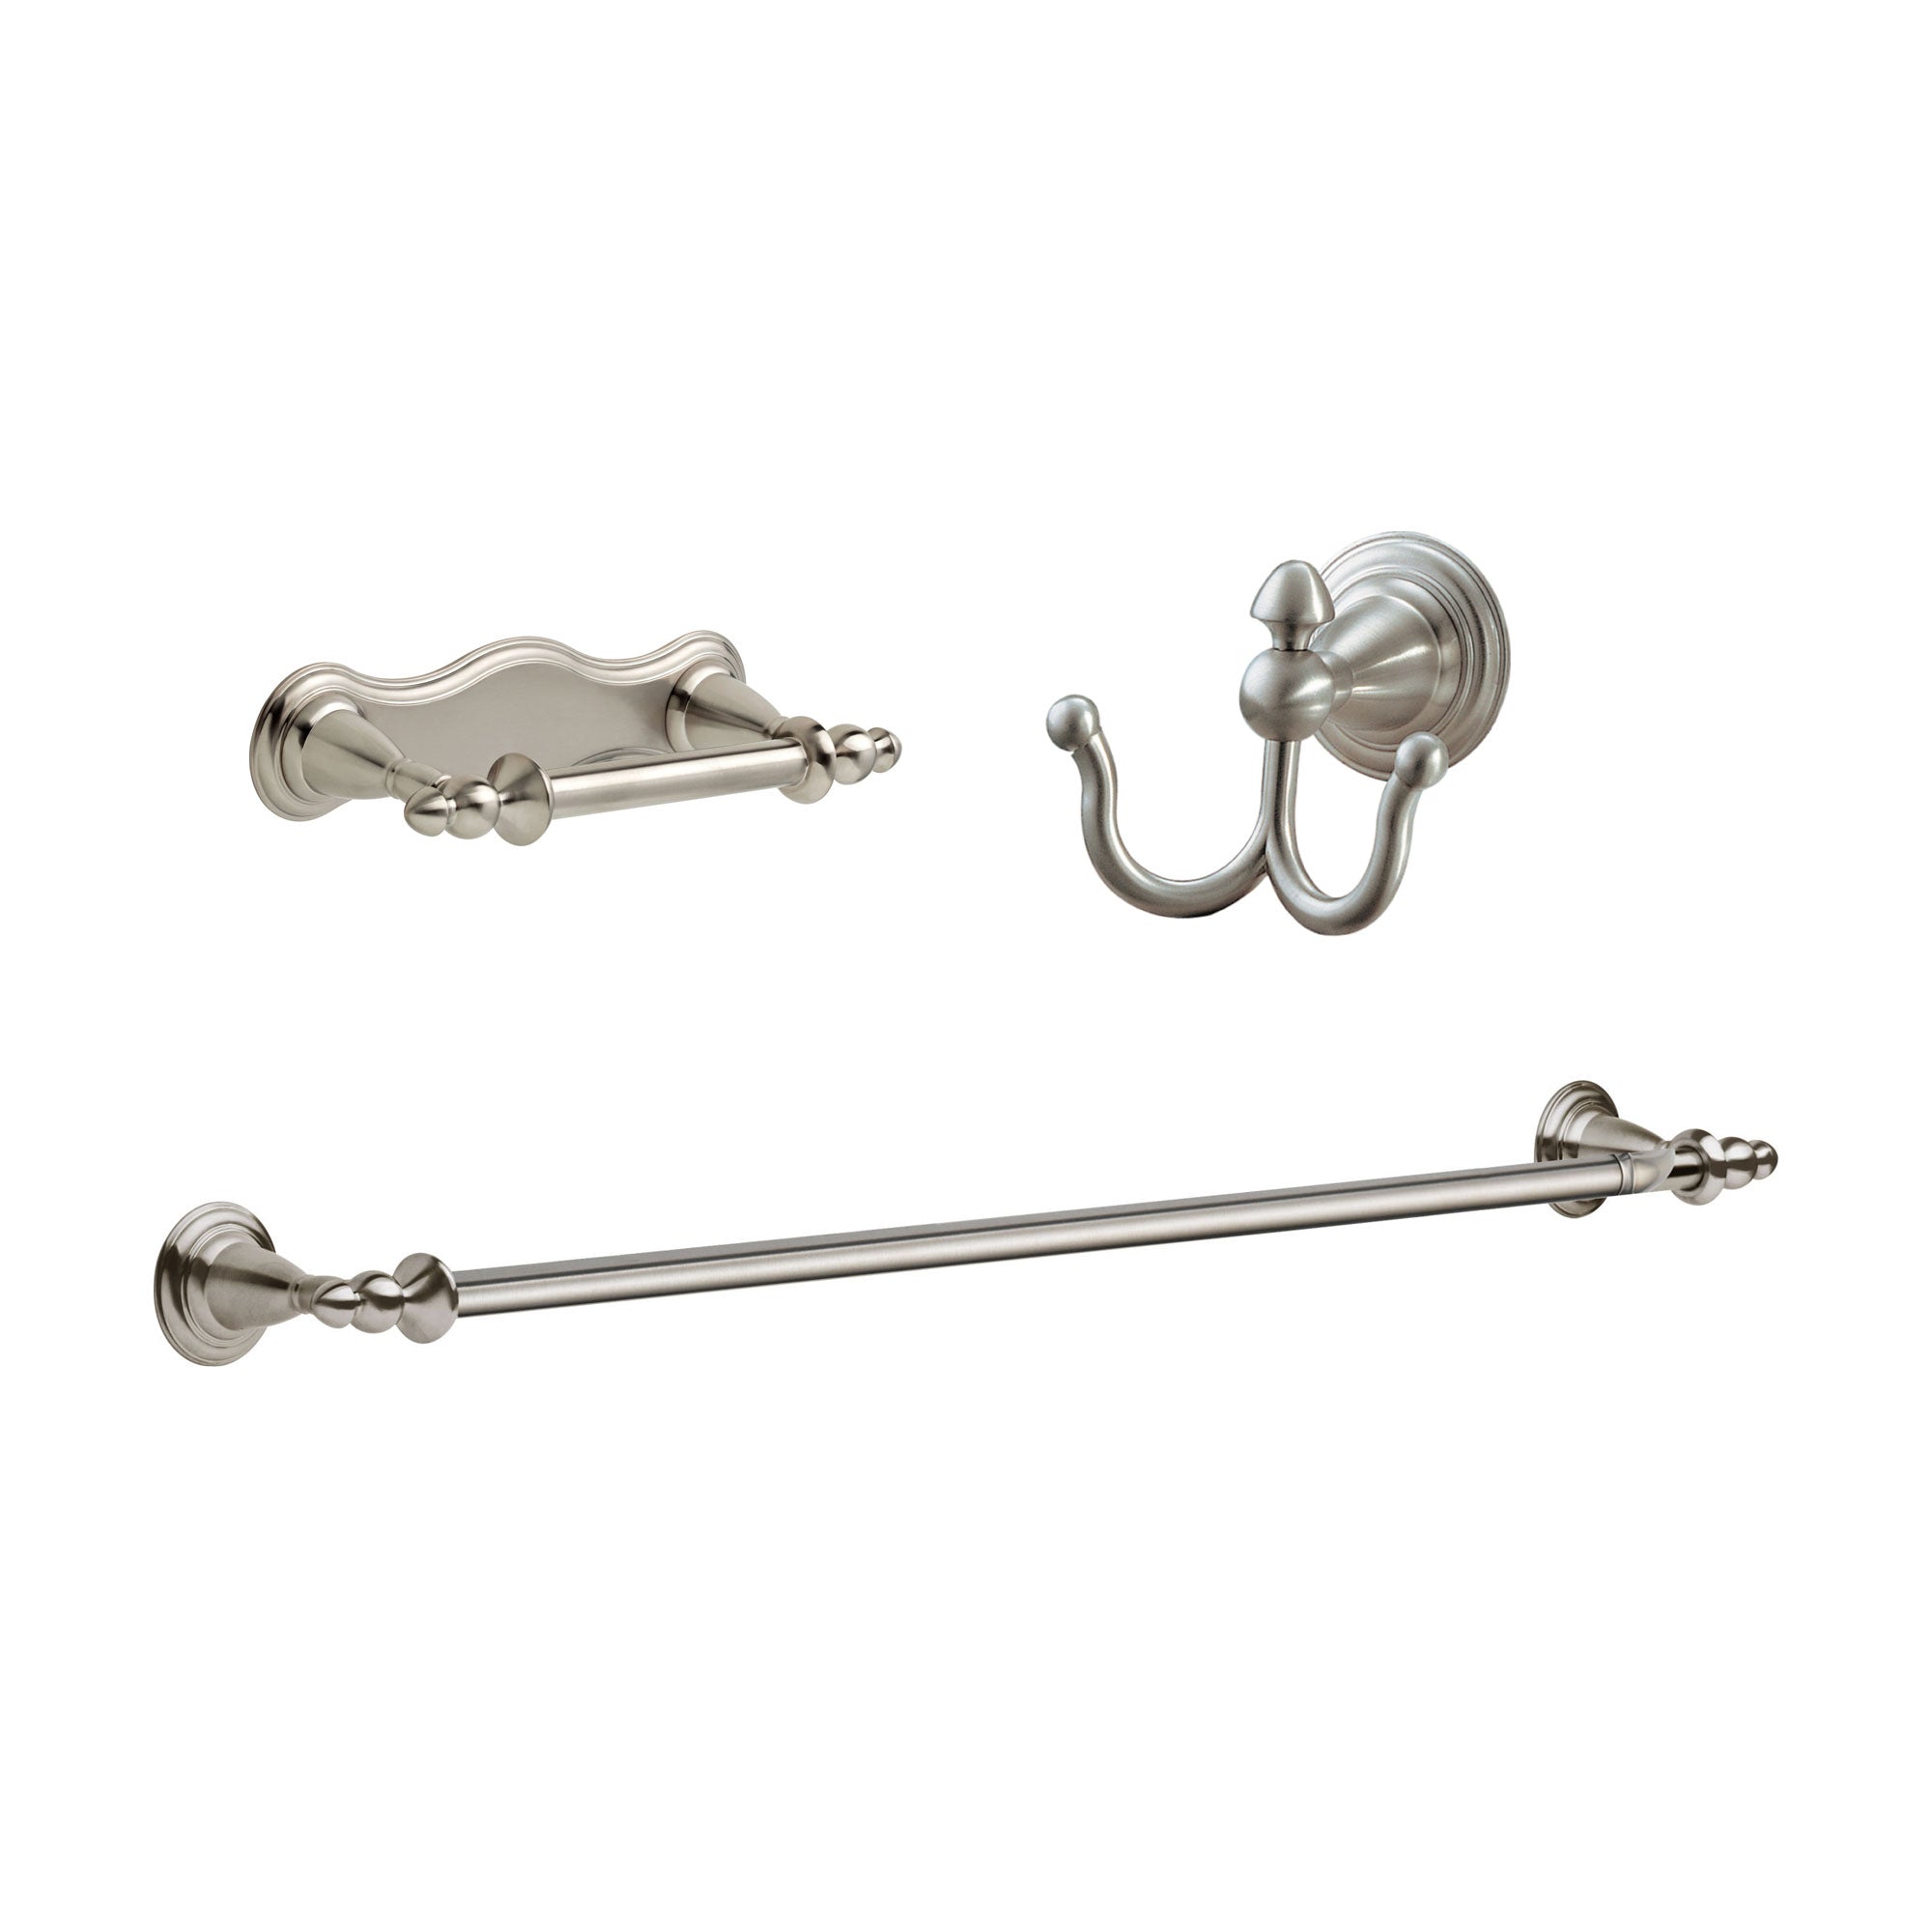 Delta Victorian Stainless Steel Finish BASICS Bathroom Accessory Set Includes: 24" Towel Bar, Toilet Paper Holder, and Robe Hook D10094AP